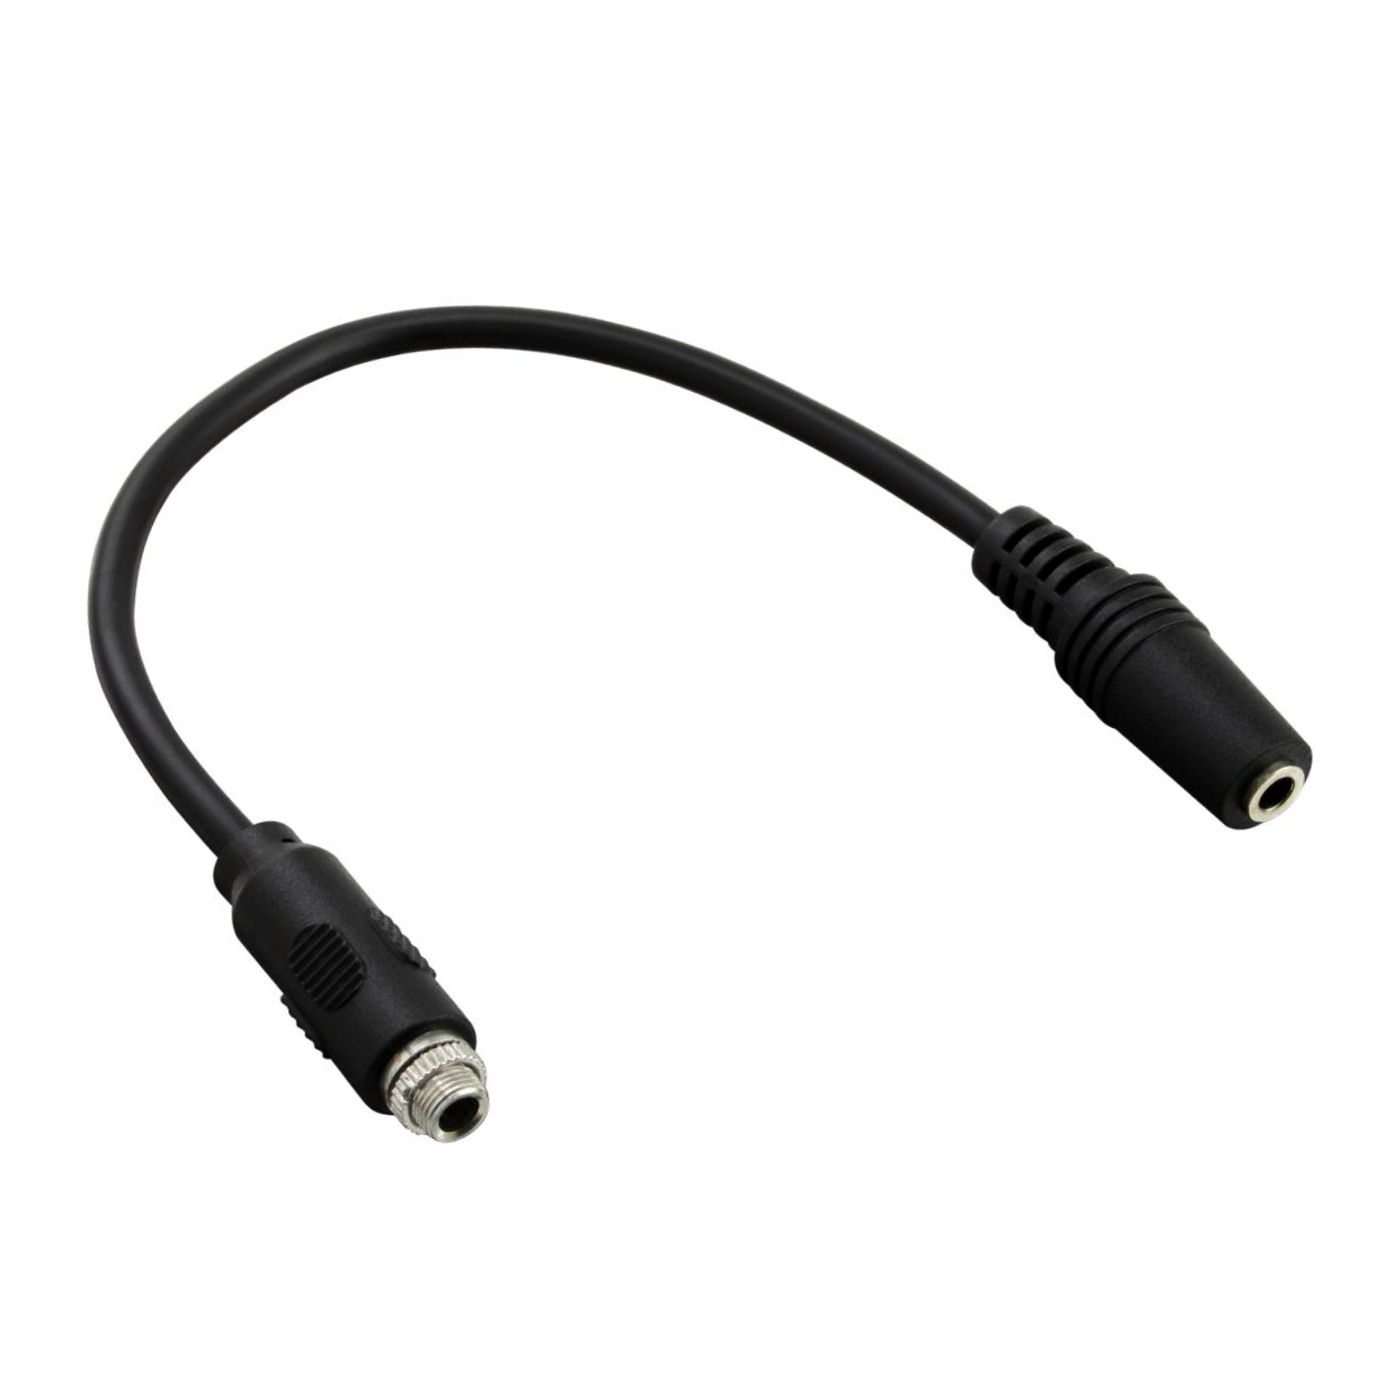 Audio mounting cable 3.5mm stereo with thread and nut